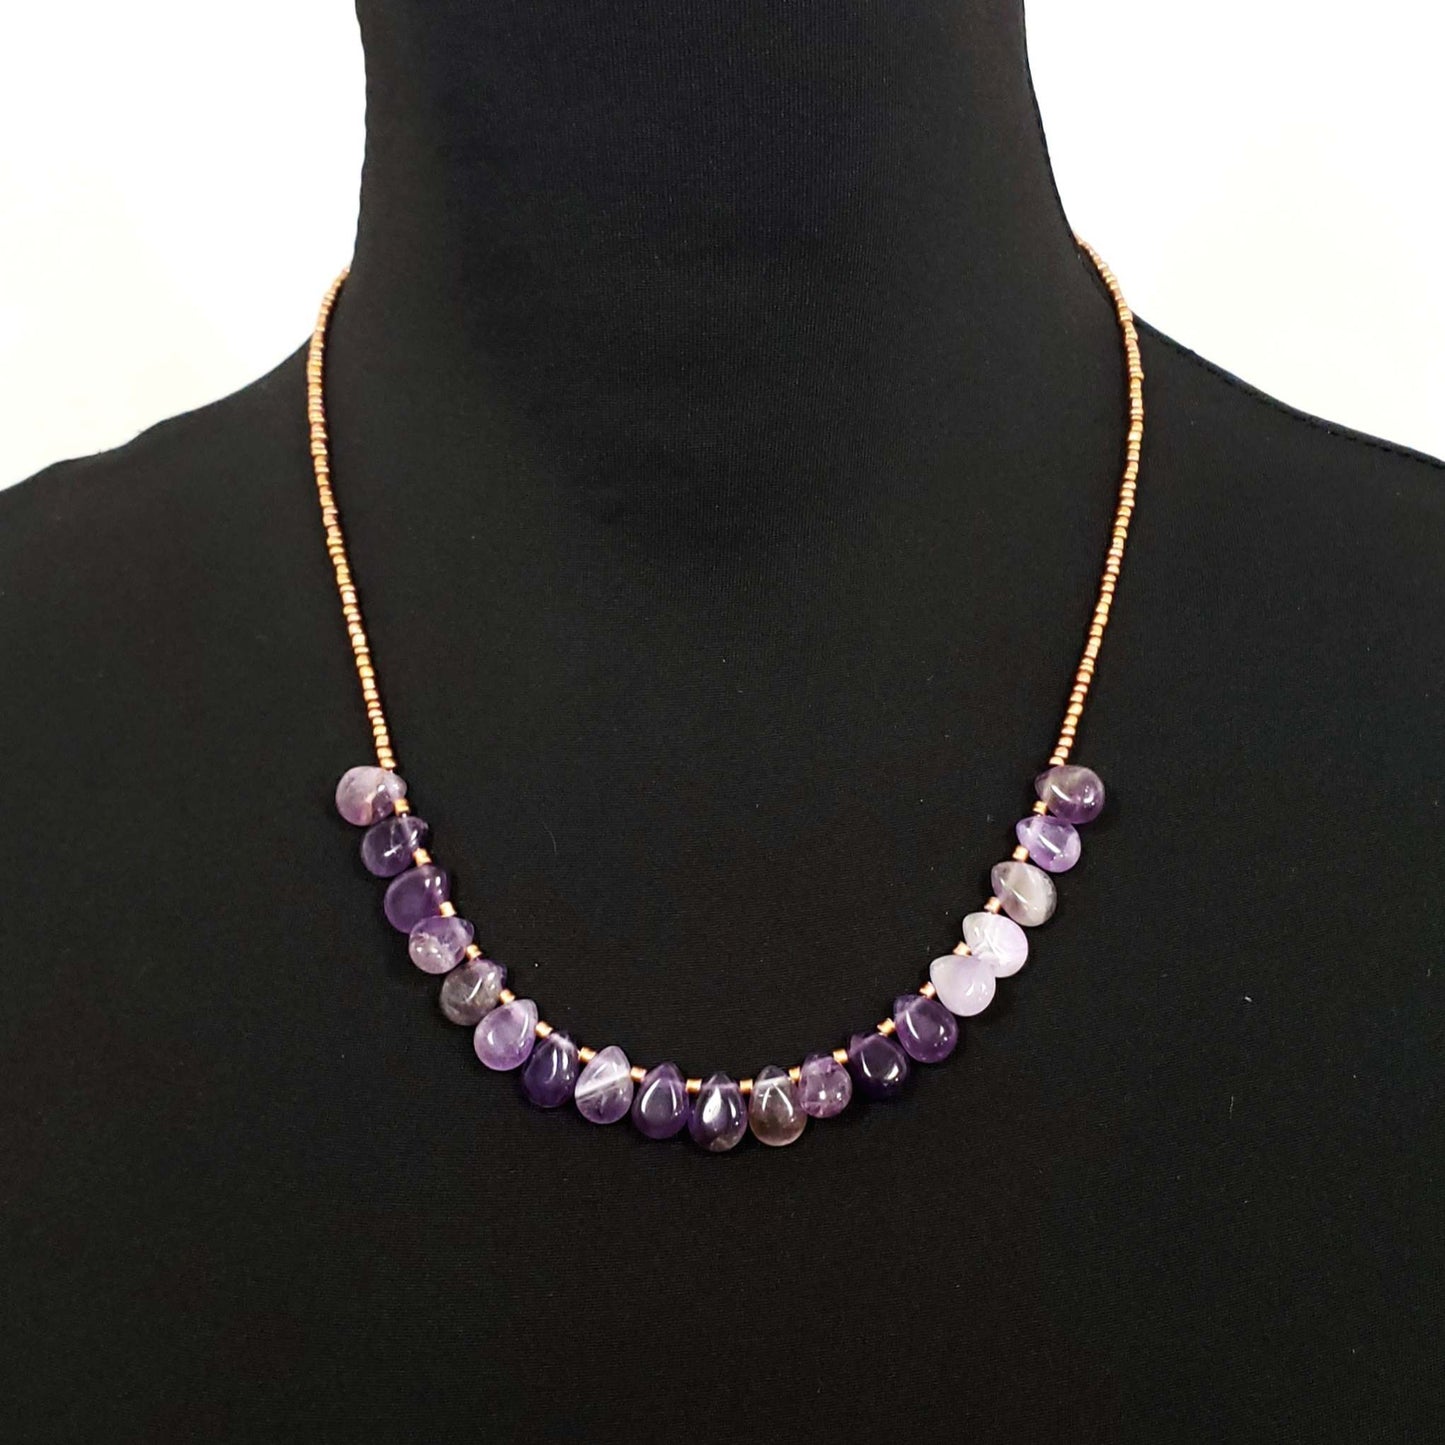 Amethyst Crystal Beaded Necklace